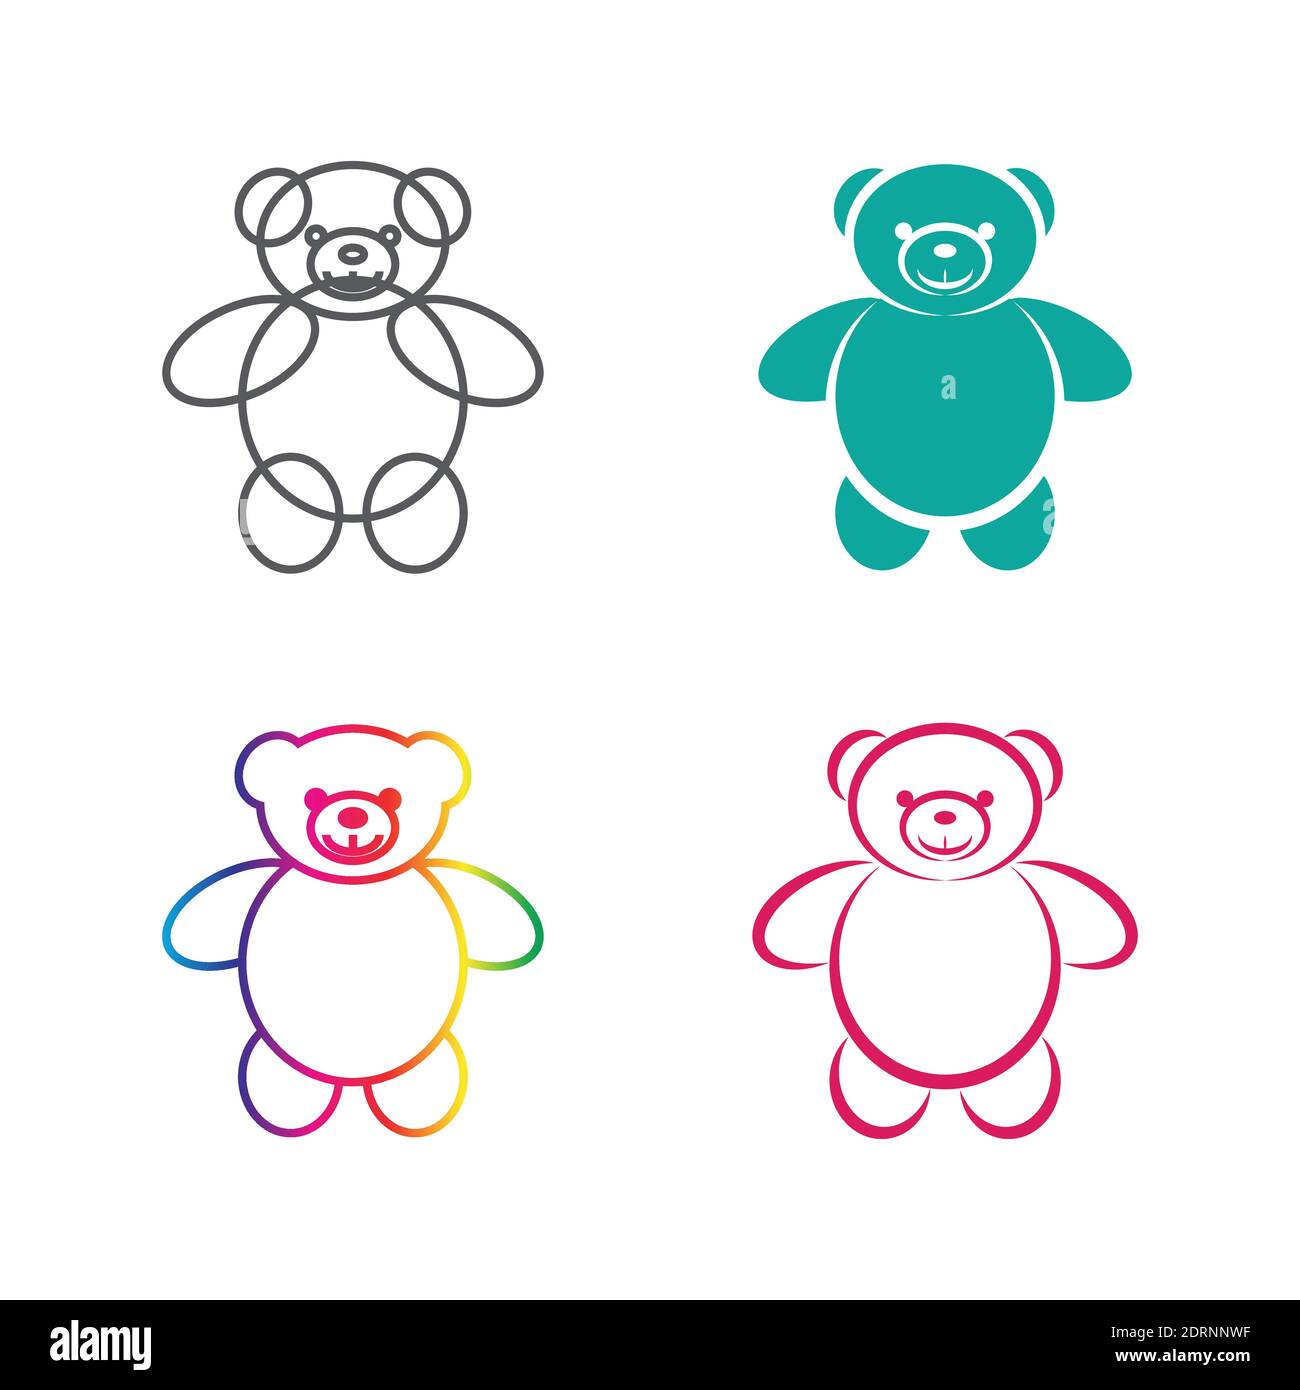 This Is The Best Way To Draw A Cute Teddy Bear – Guaranteed To Make You  Smile!